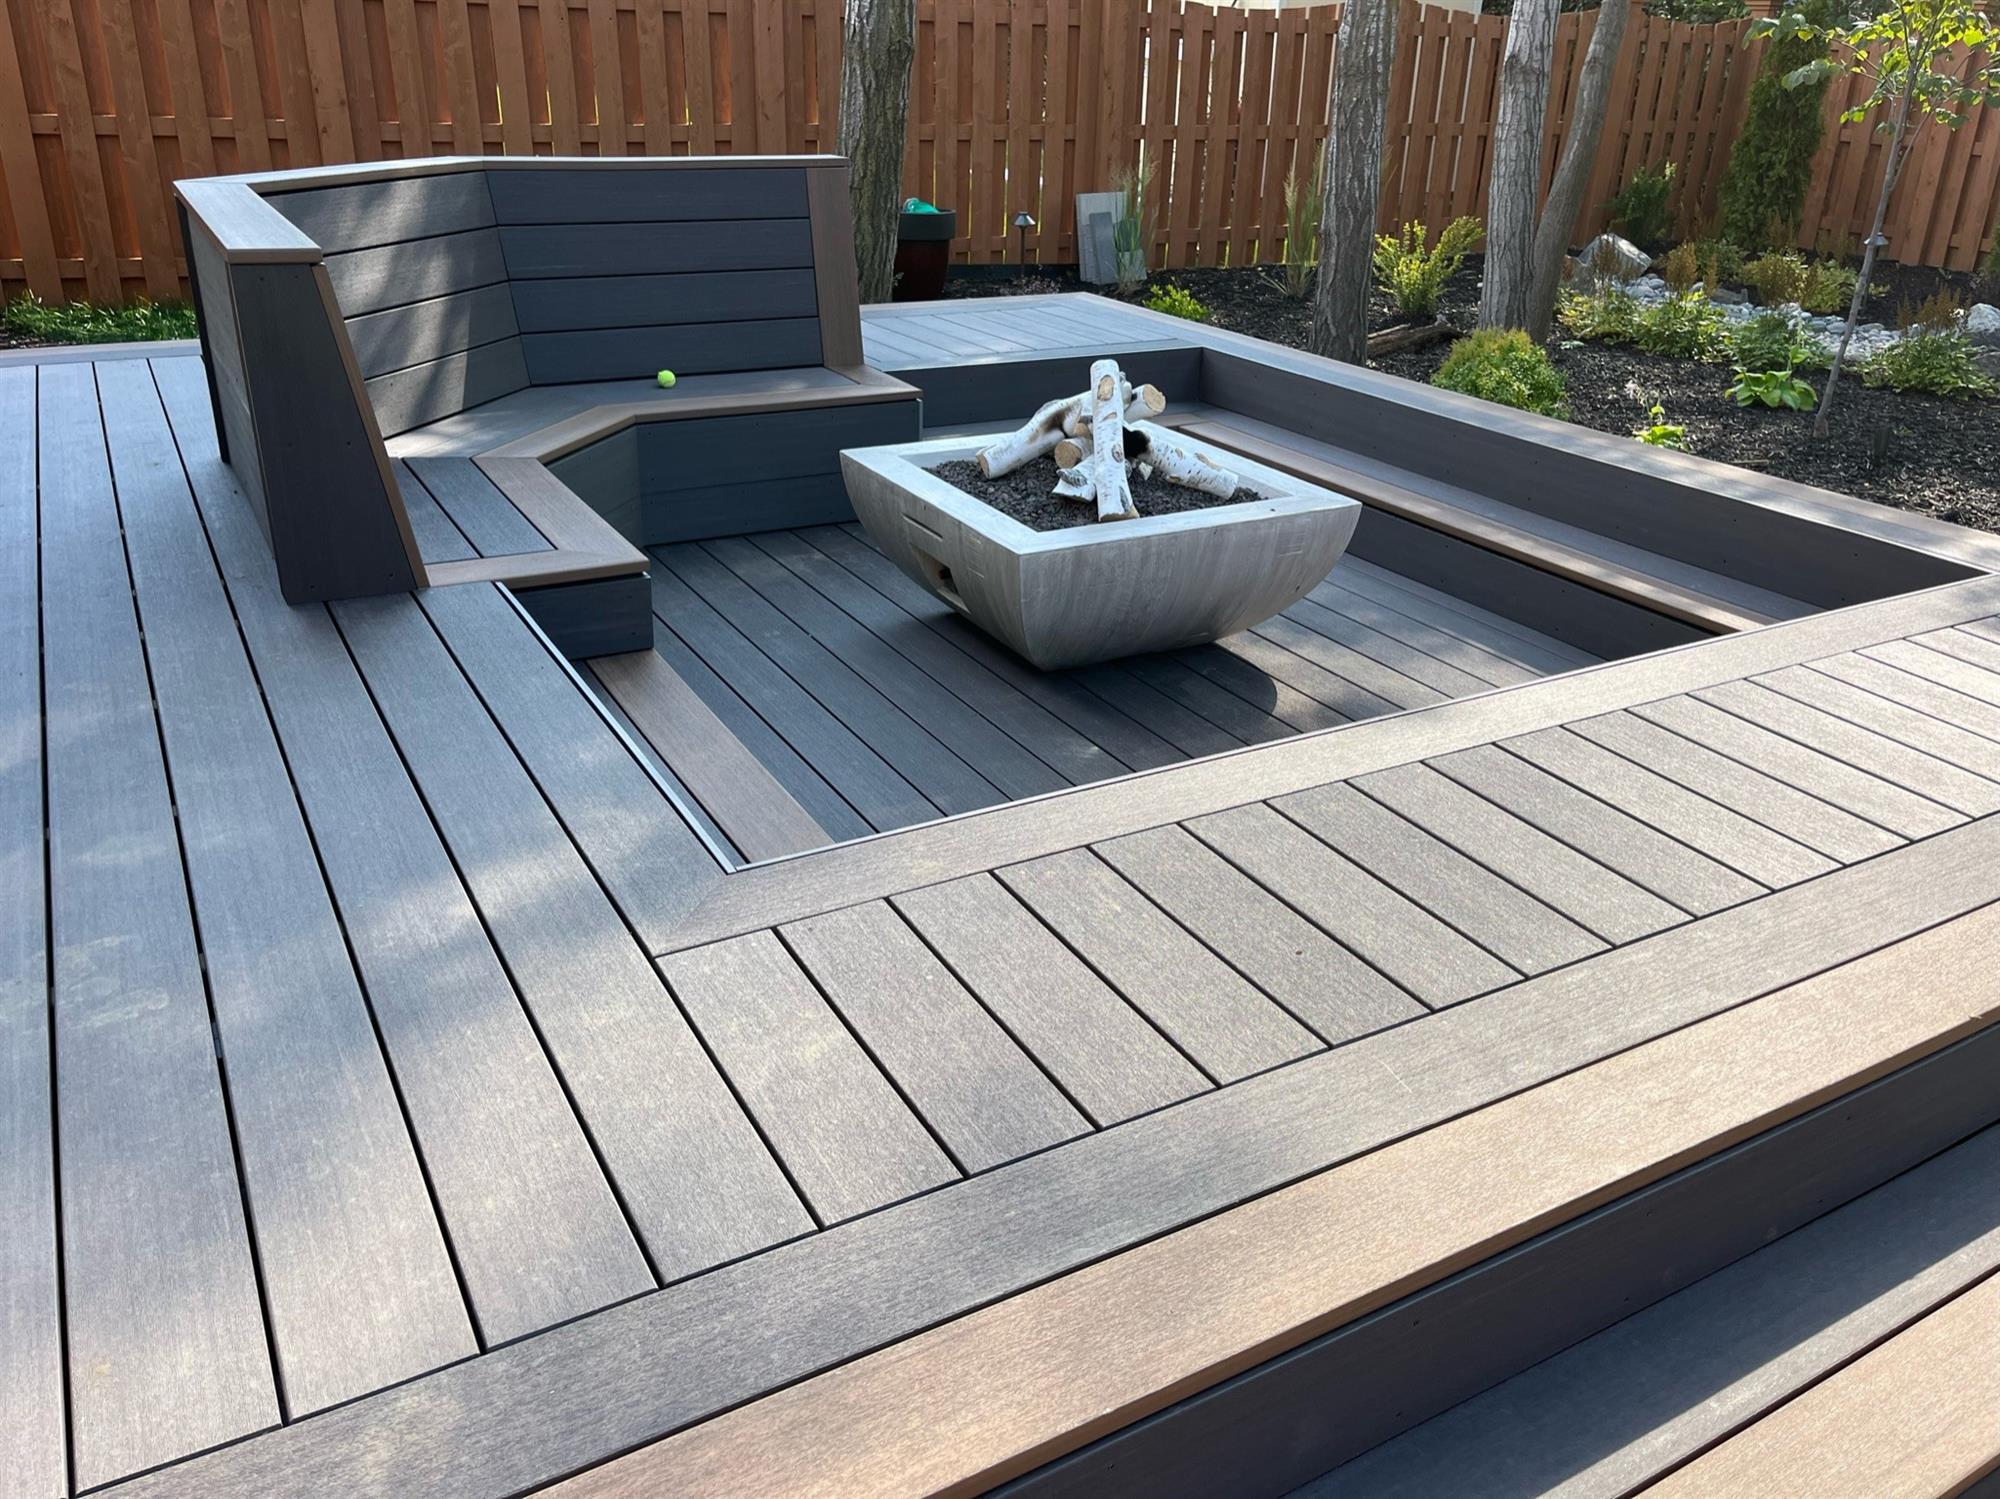 Dark grey and brown deck with built-in seating and recessed outdoor fire pit.